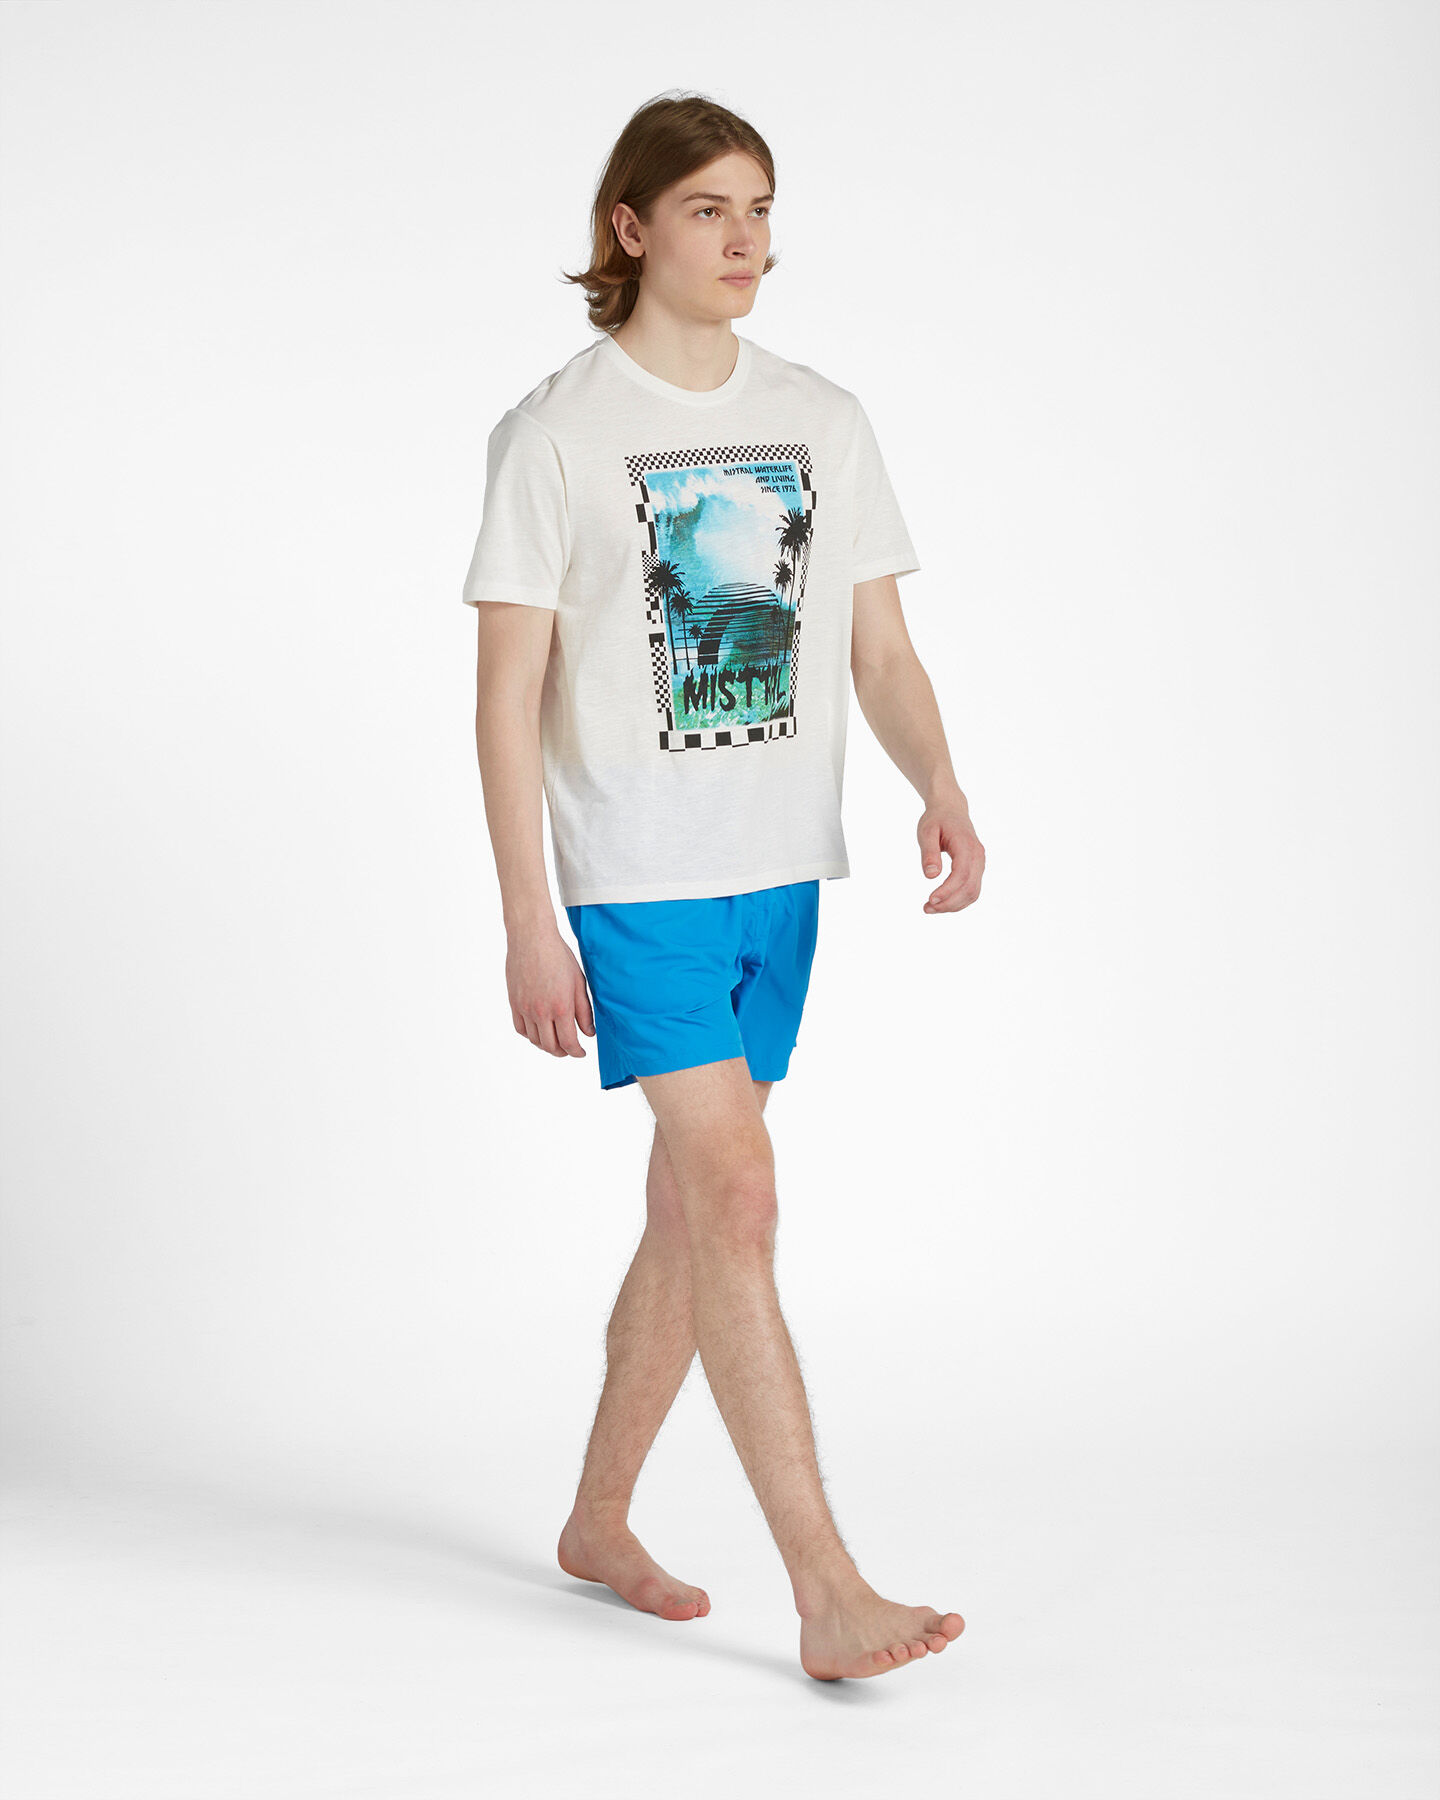  T-Shirt MISTRAL PHOTO M S4102911|001|M scatto 3